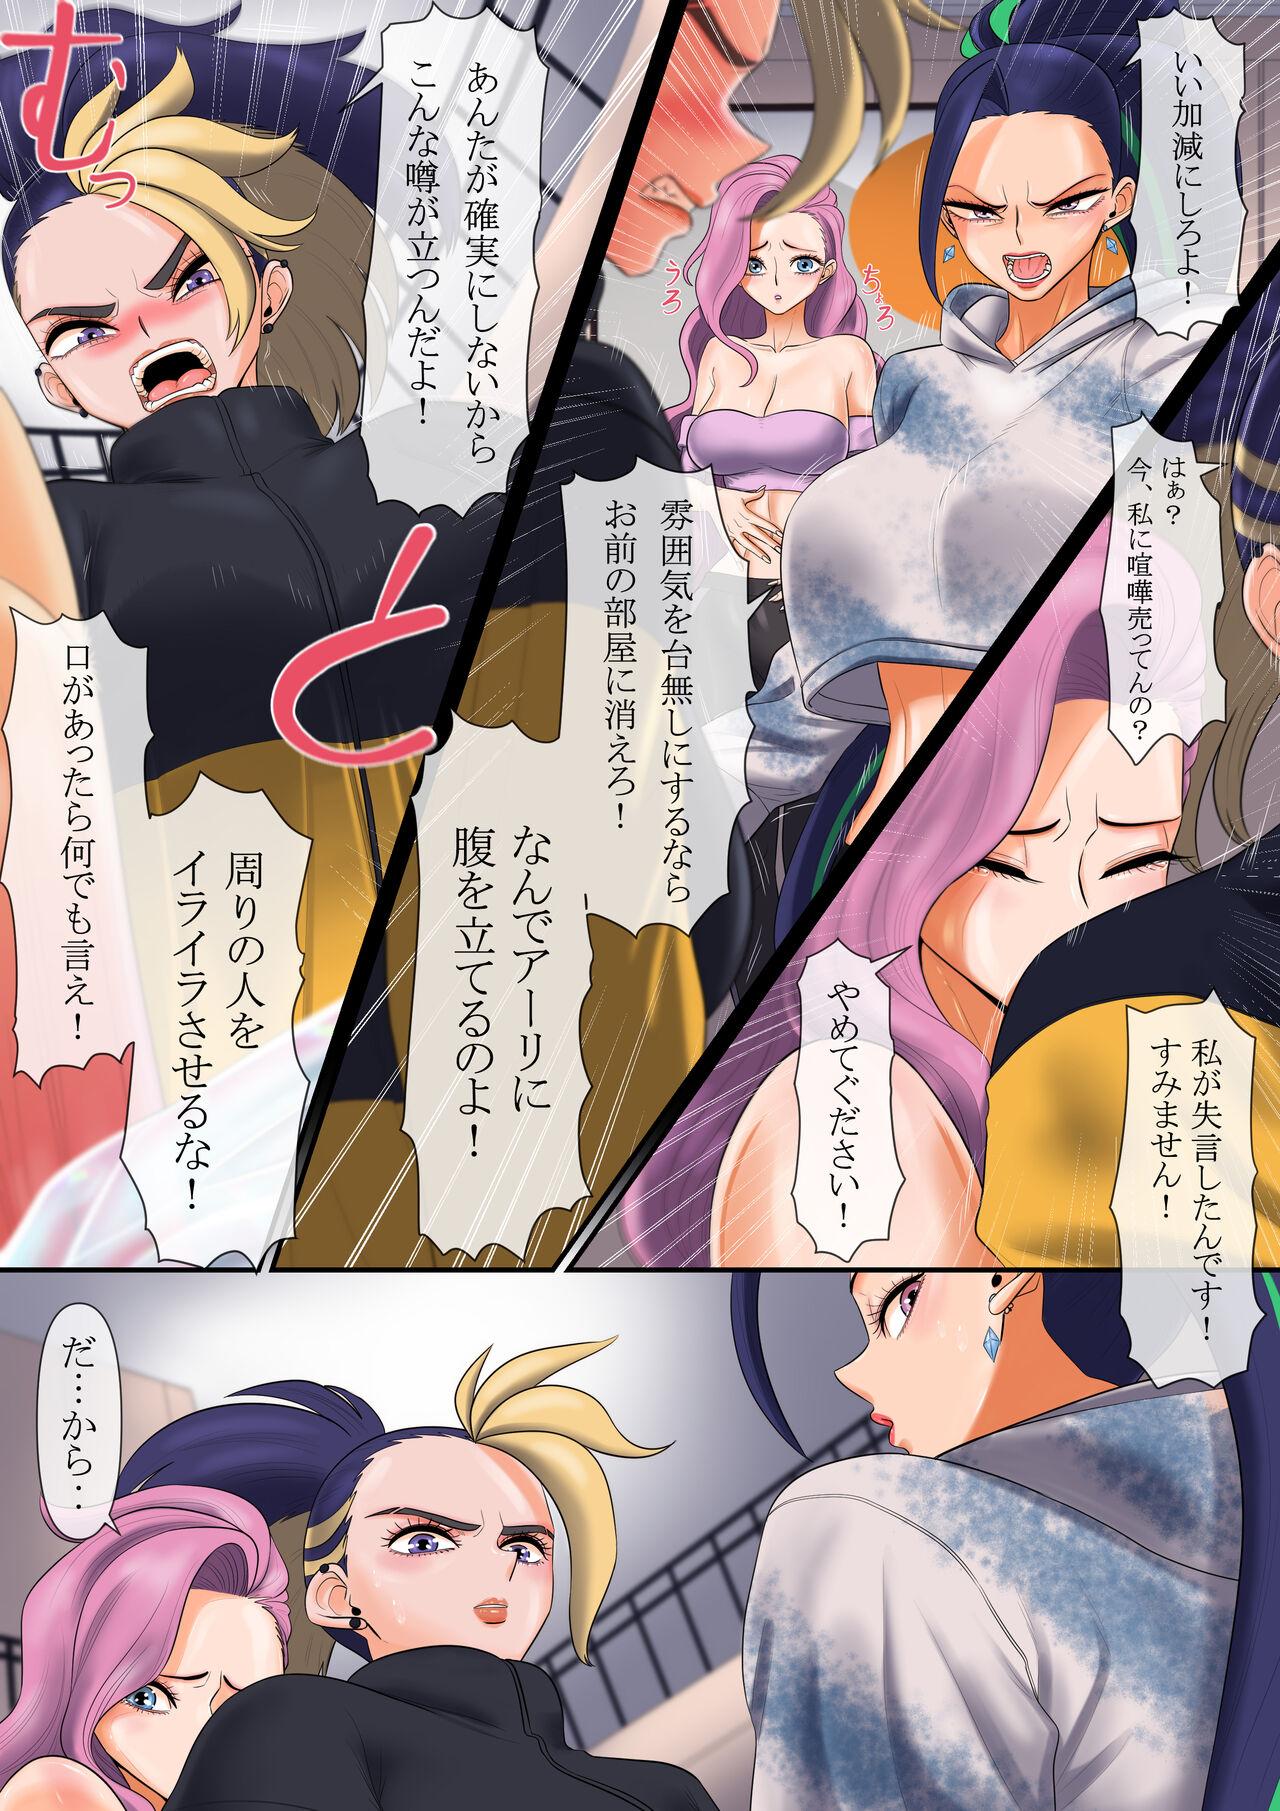 Pussyfucking 守りたいもの... - League of legends Made - Page 5